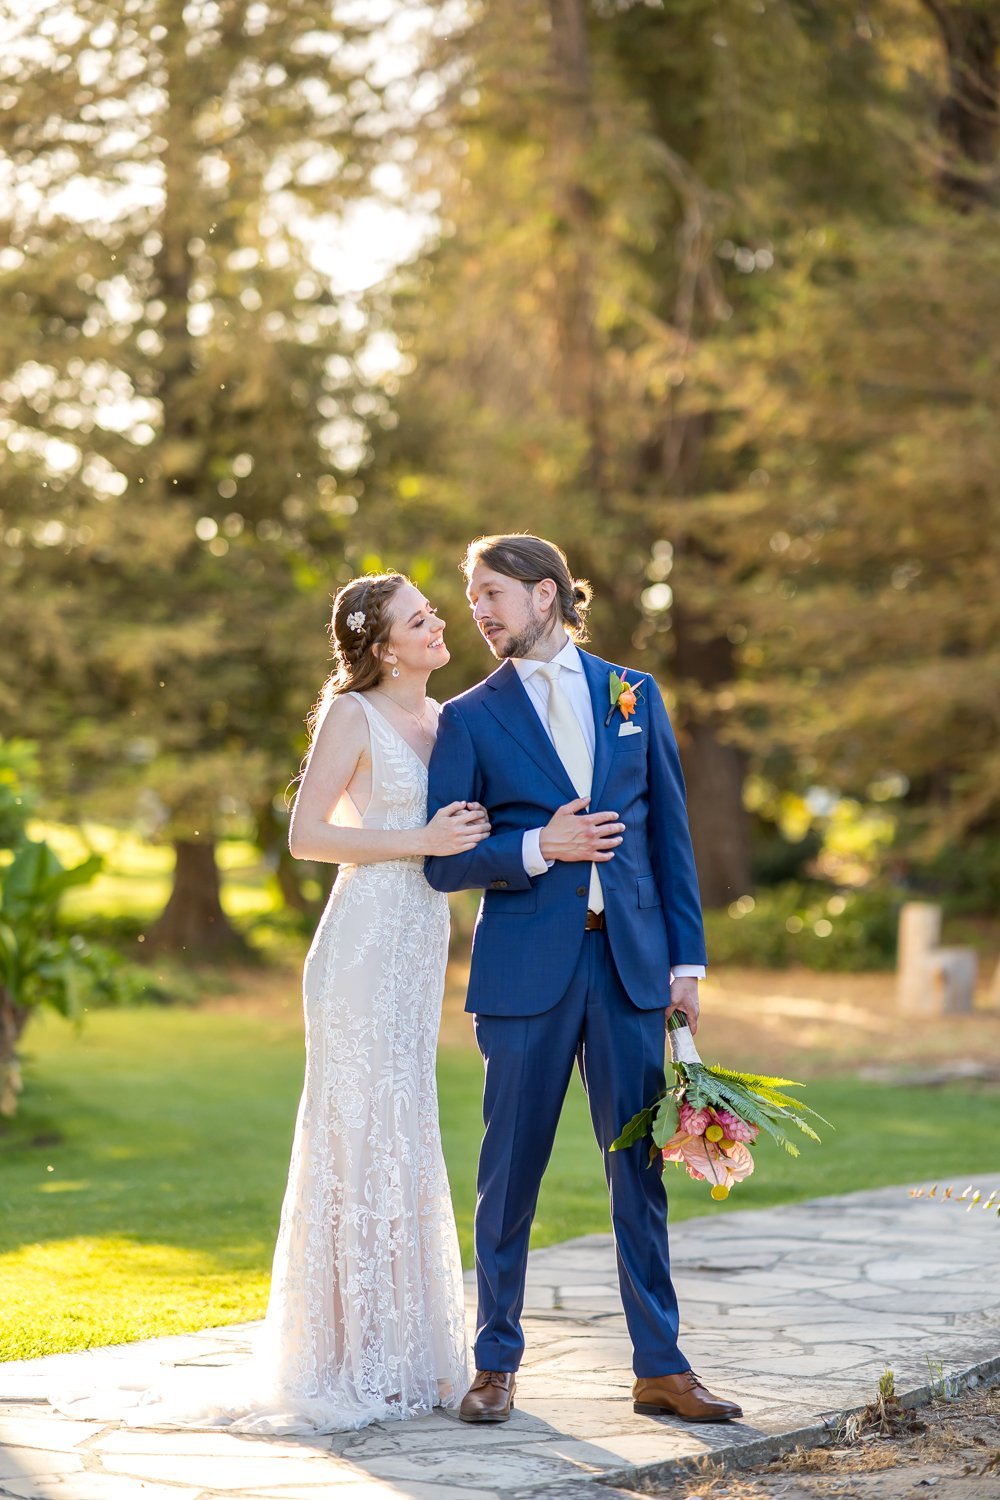 www.santabarbarawedding.com | Santa Barbara Courthouse | Elizabeth Victoria Photography | Hogue &amp; Co. | Floravere | La Rouge Artistry | Bride and Groom Embracing Outside by the Trees